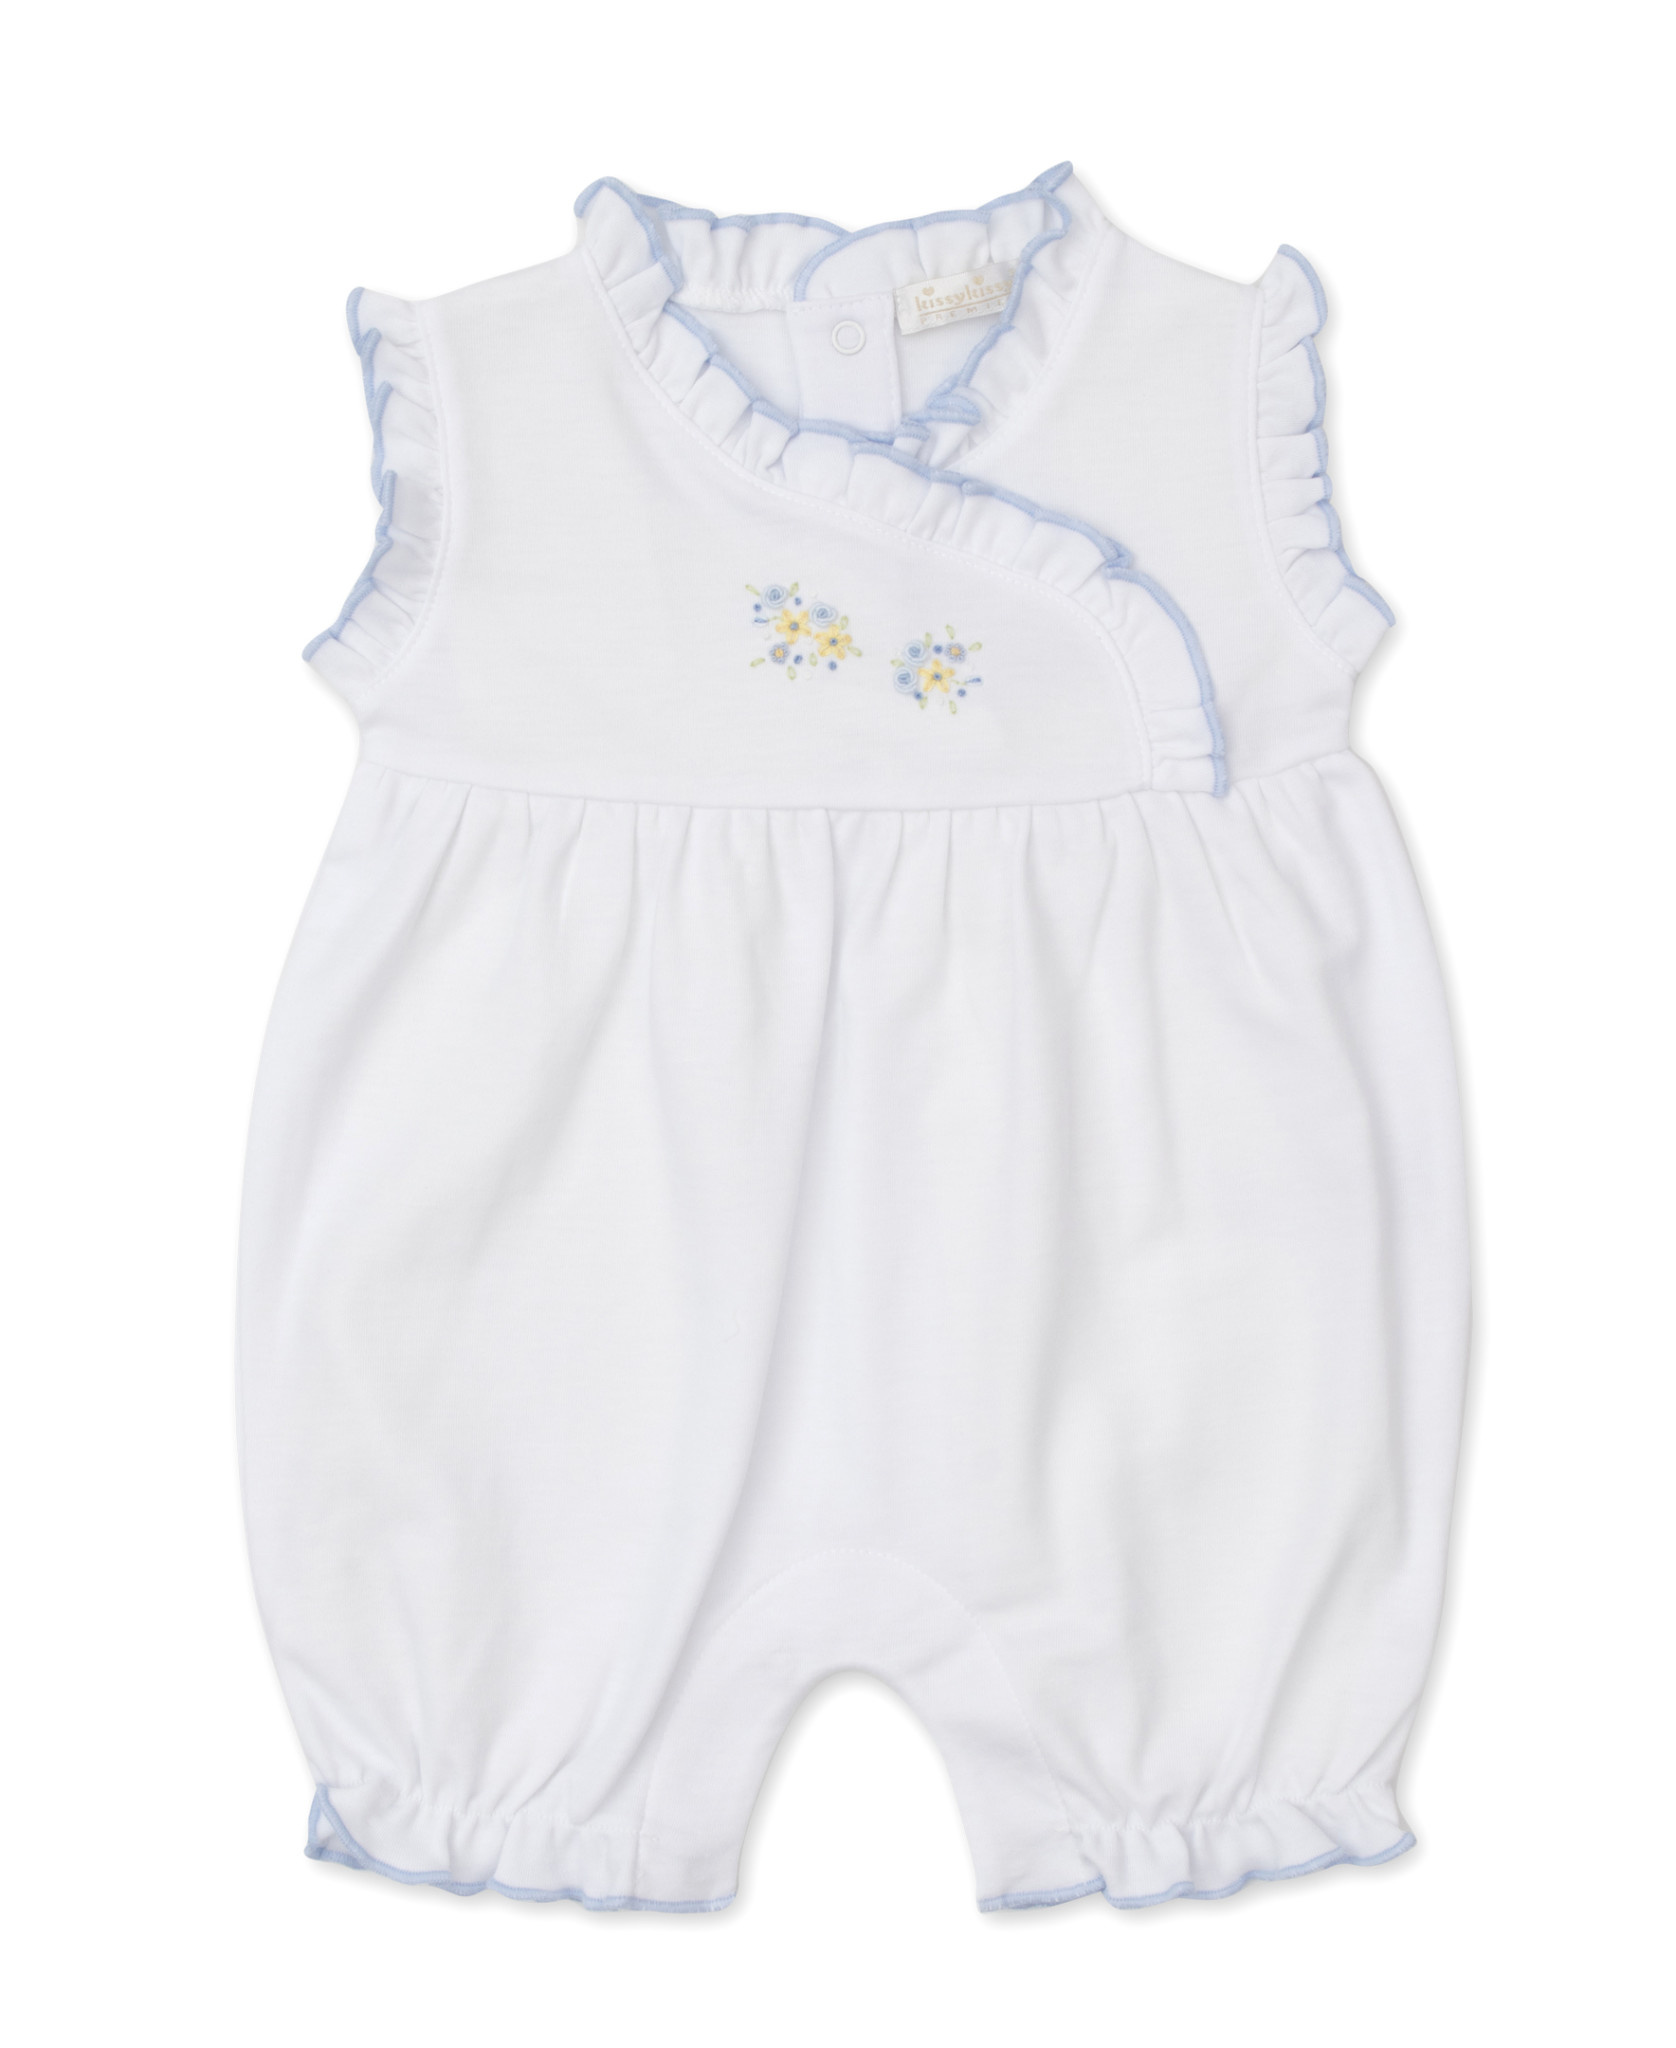 Kissy Kissy White/Blue Hand Embroidered Sleeveless Playsuit